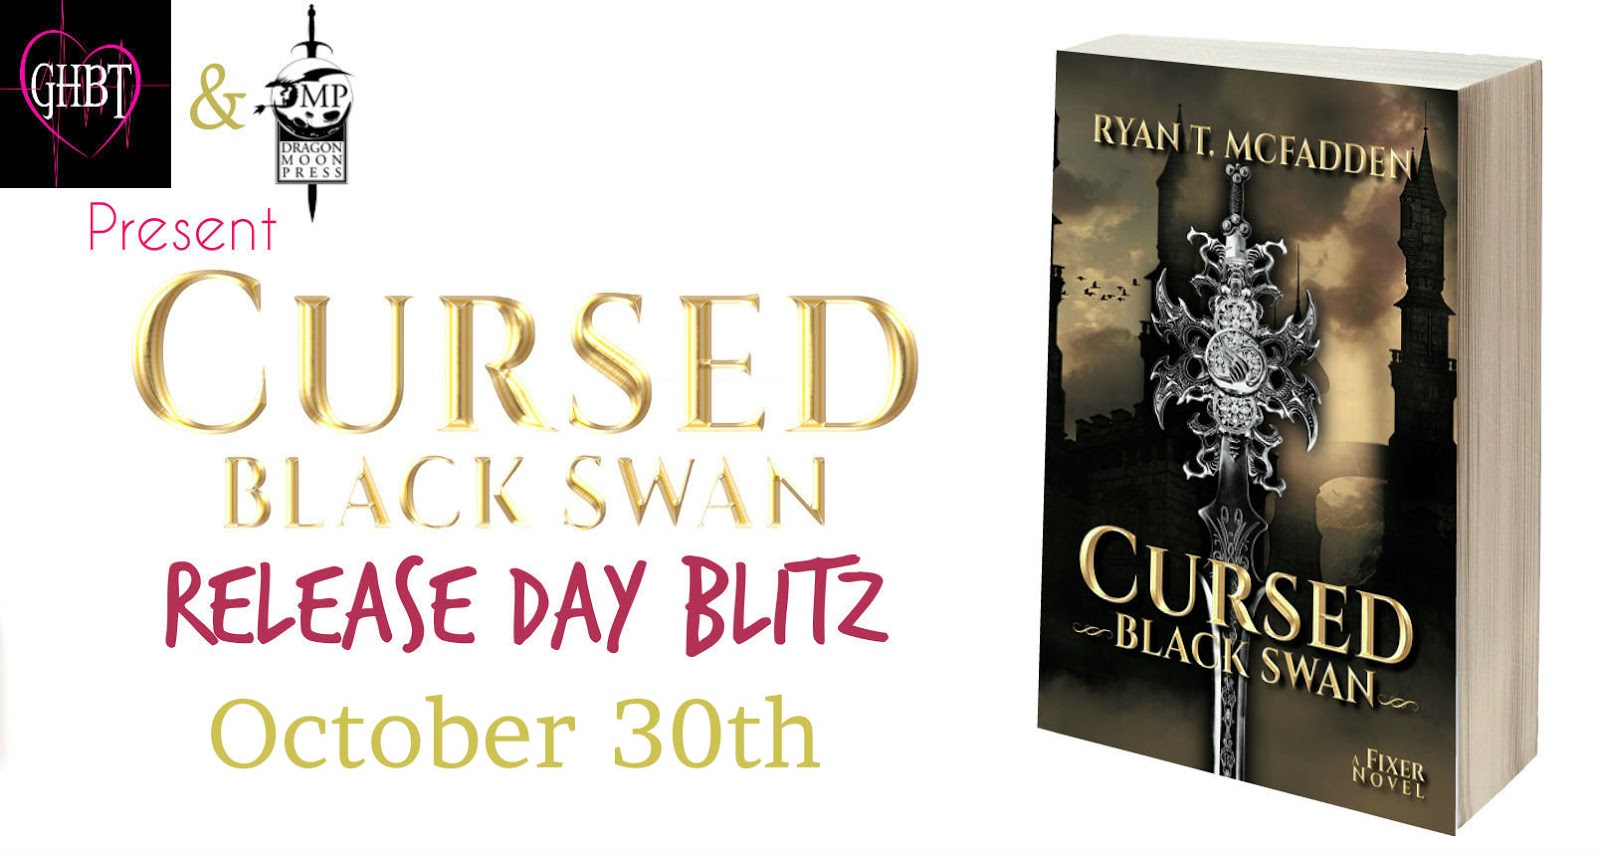 Book Review: Cursed: Black Swan by Ryan T. McFadden